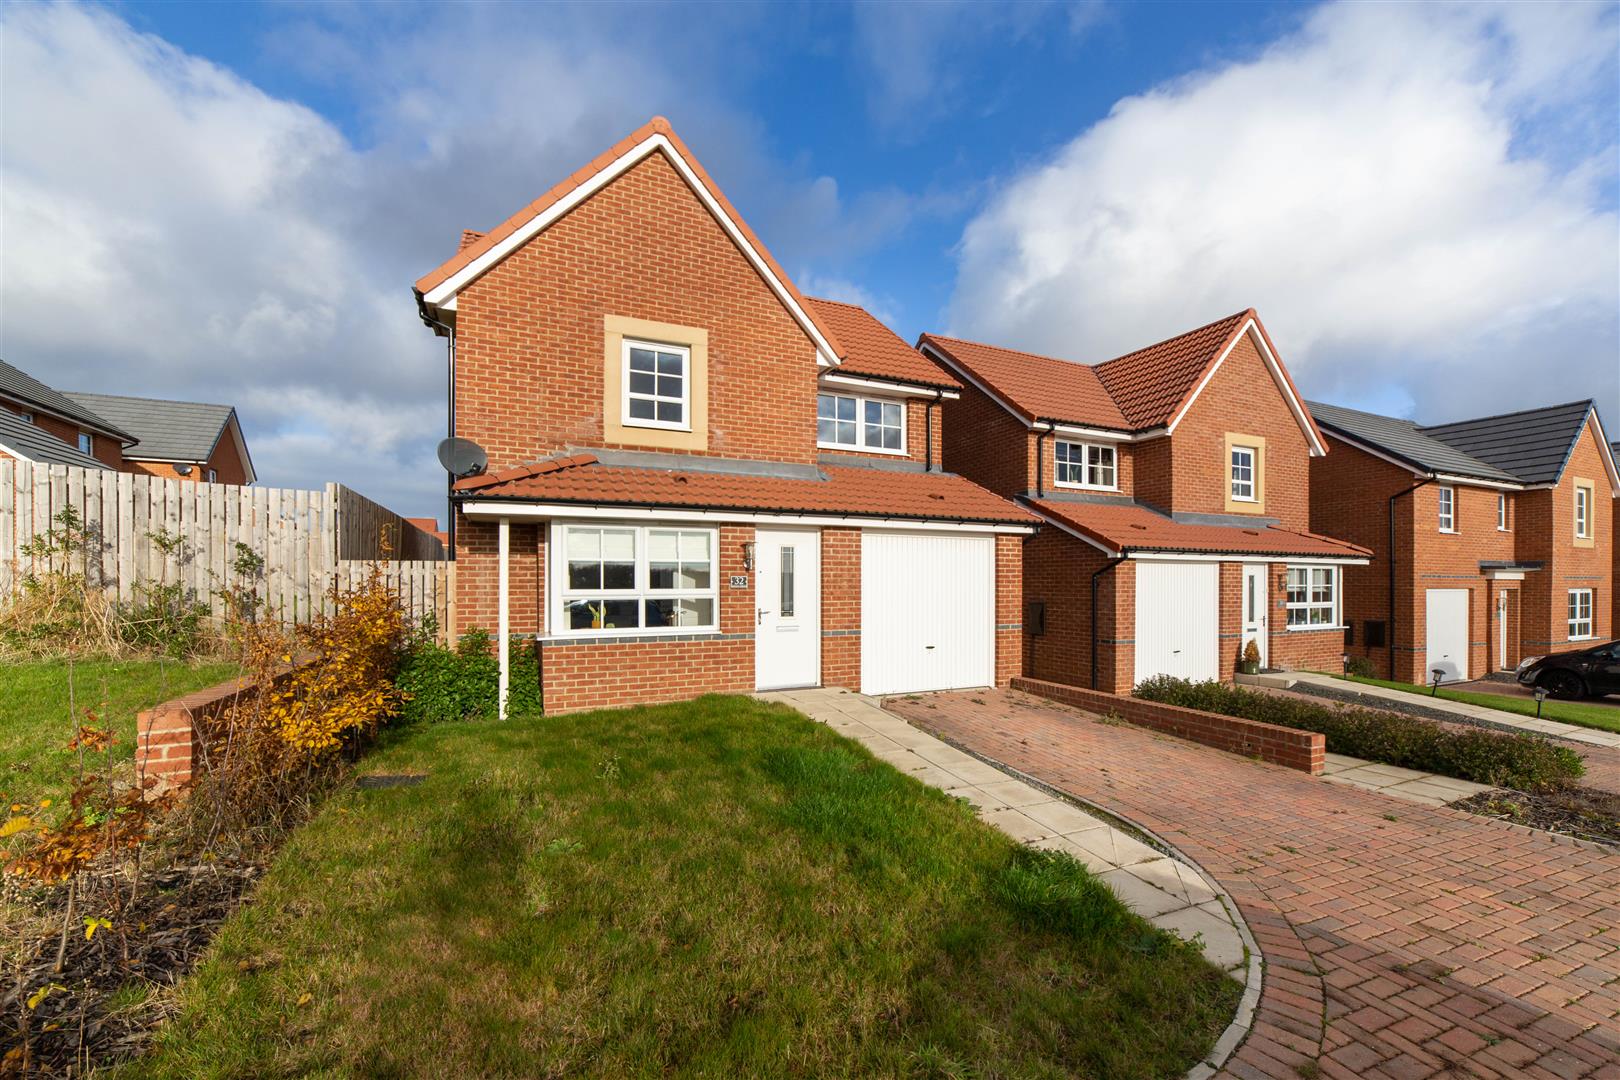 3 bed detached house for sale in Ascot Drive, Newcastle Upon Tyne, NE13